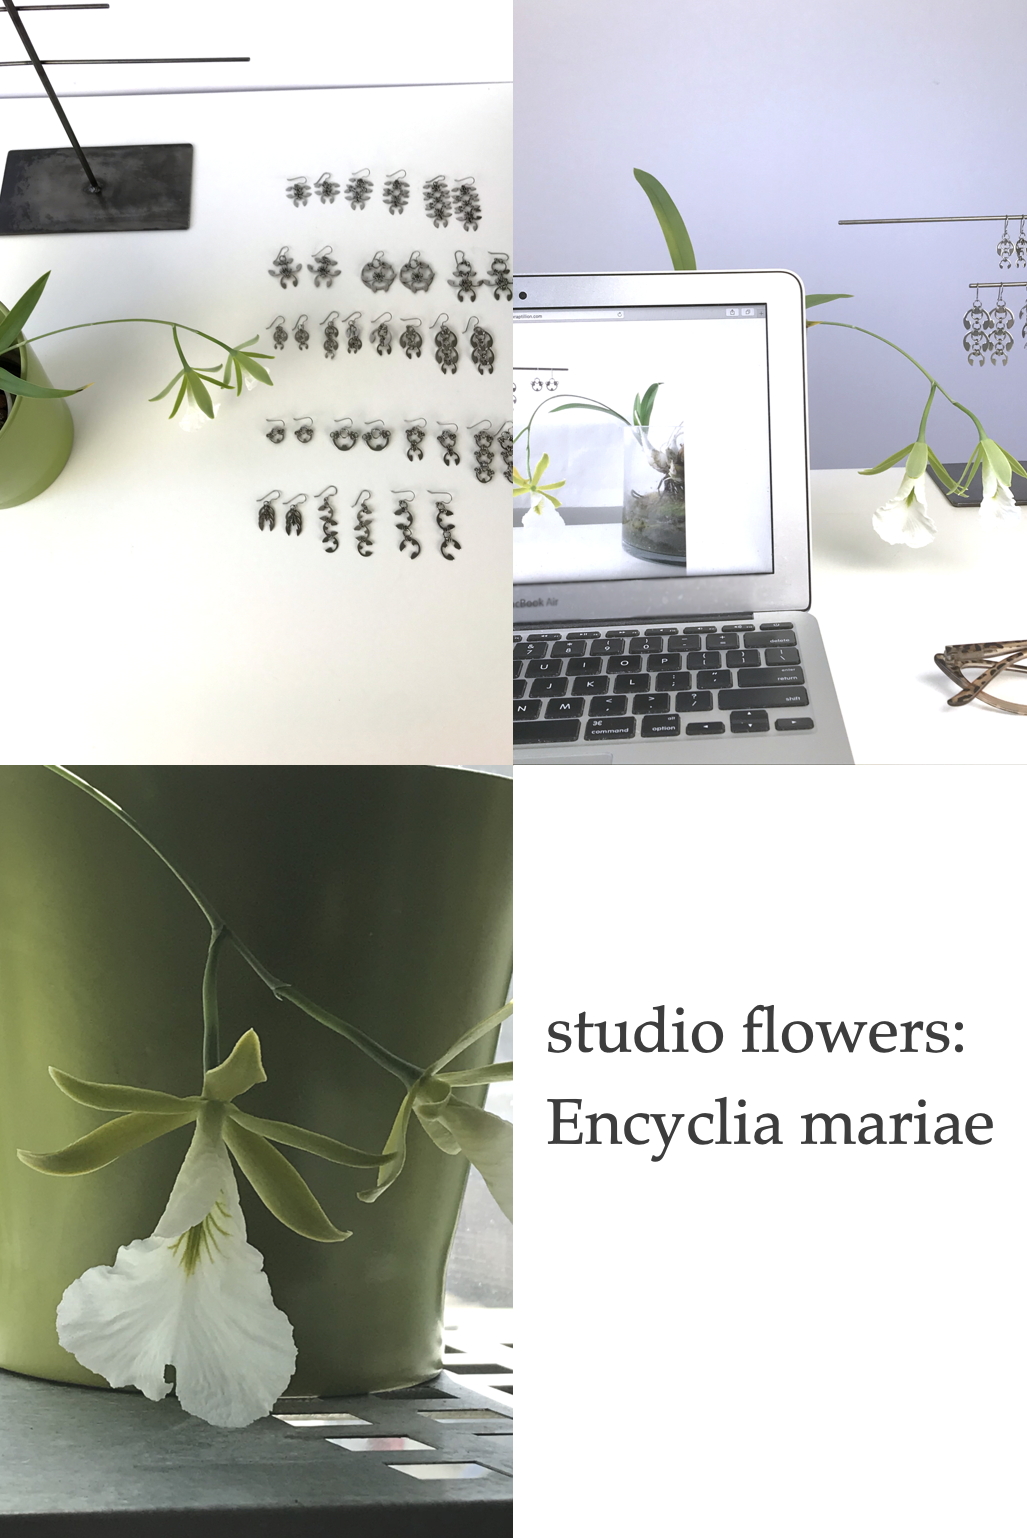 Compiled image featuring orchid Encyclia mariae (formerly Euchile mariae) blooming in Wraptillion's studio. Text on image reads: studio flowers: Encyclia mariae.